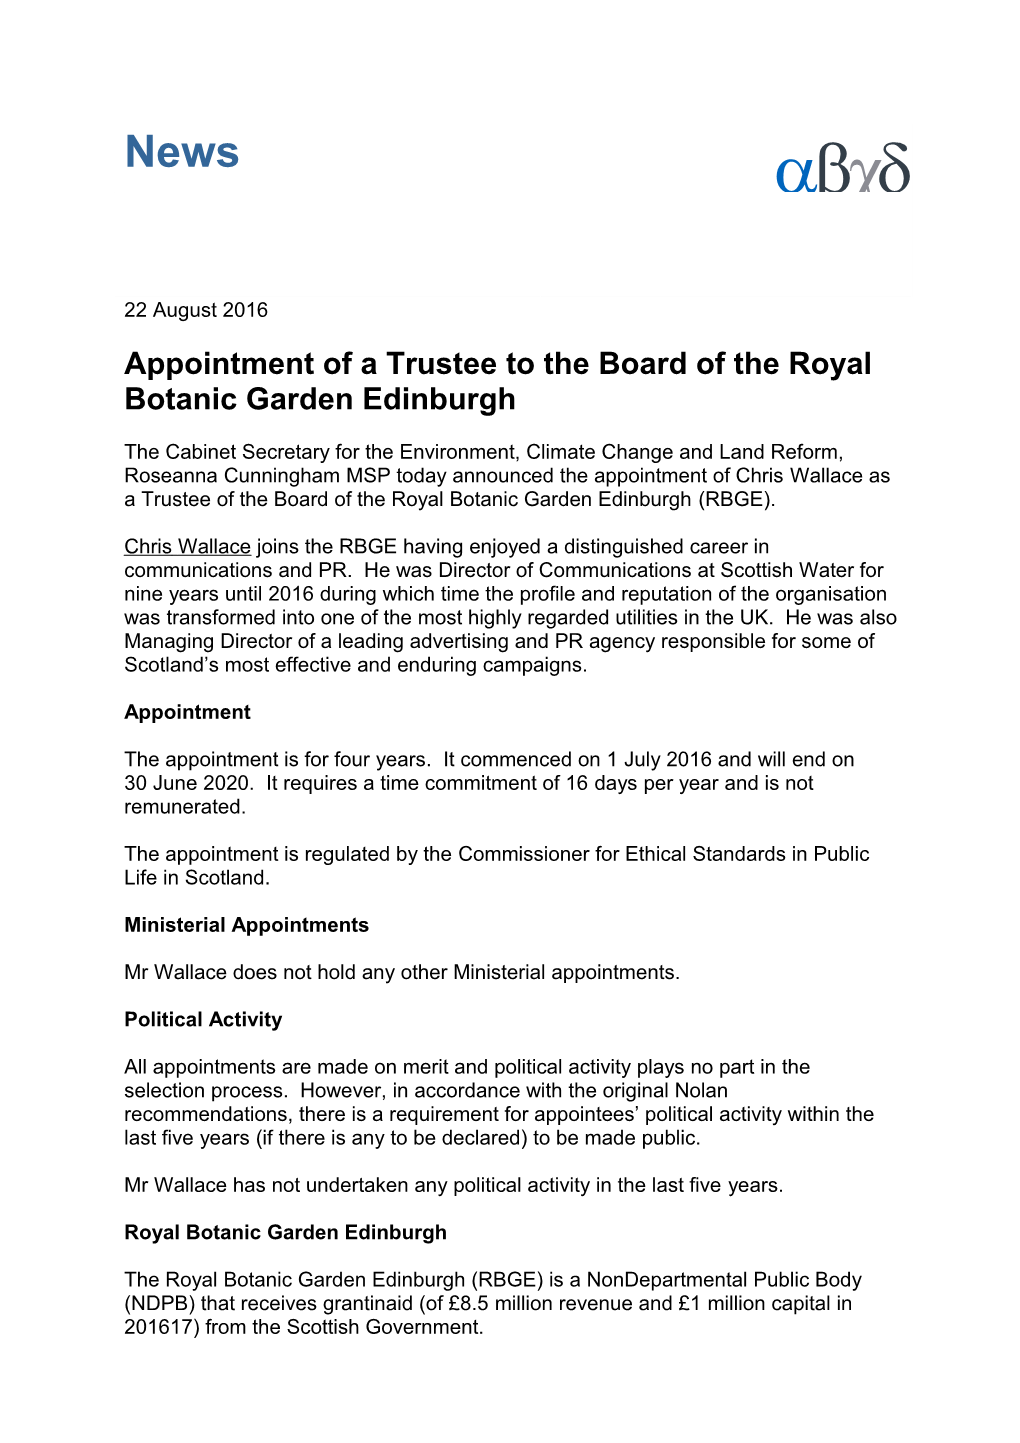 Appointment of a Trustee to the Board of the Royal Botanic Garden Edinburgh